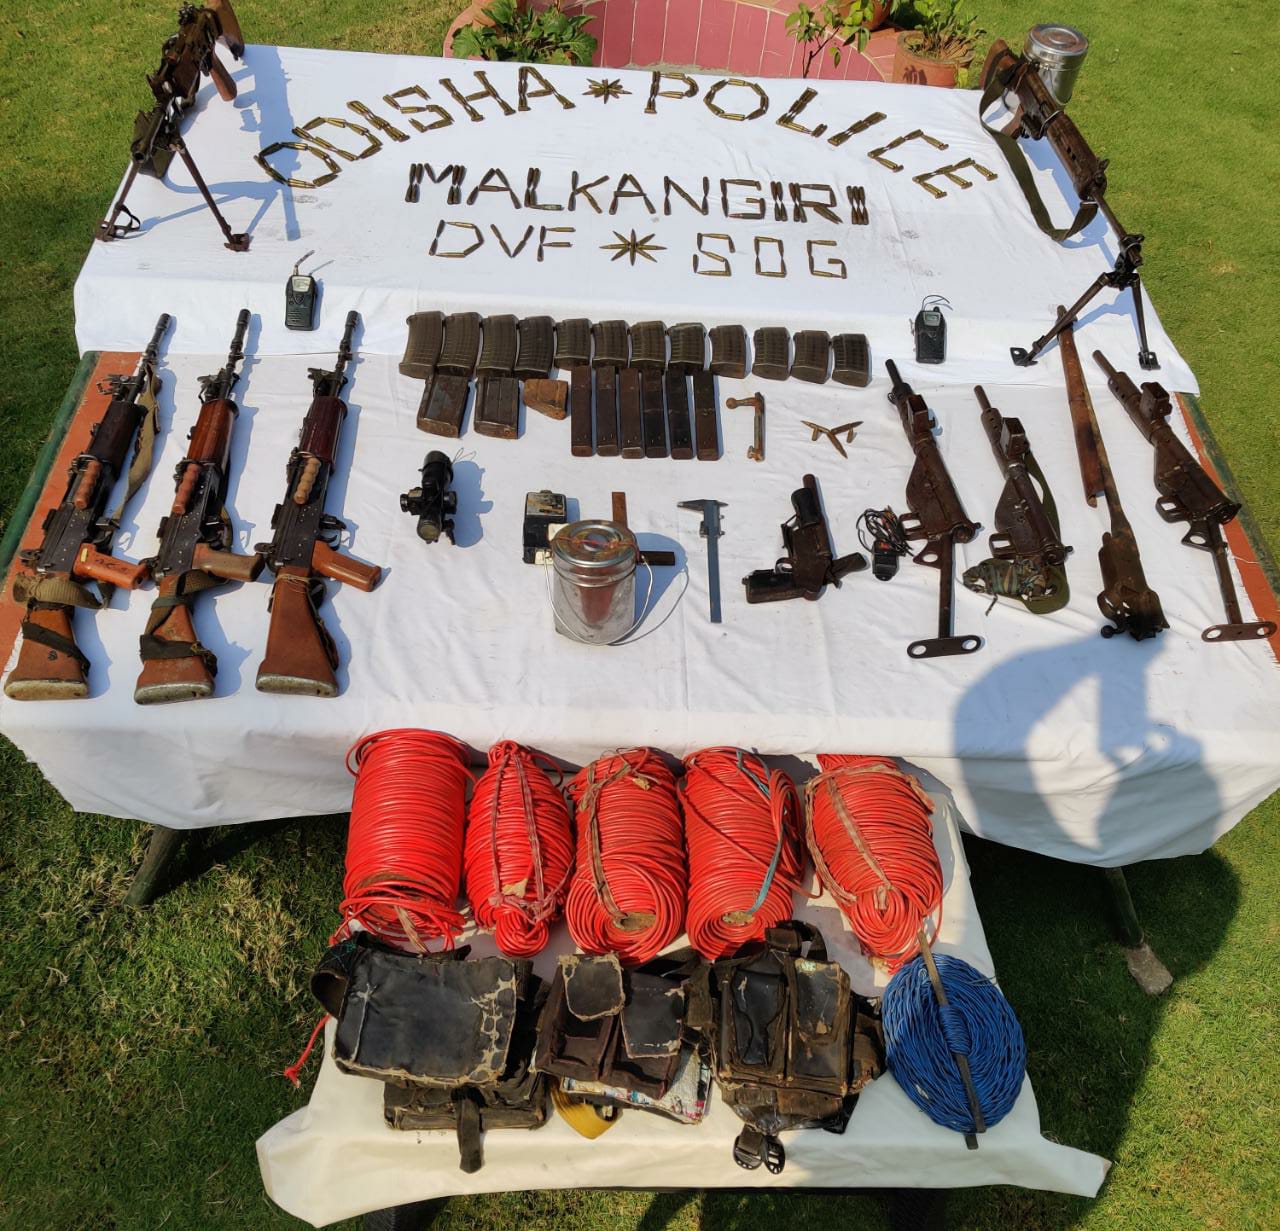 Huge amount of arms and ammunition seized in Malkangiri